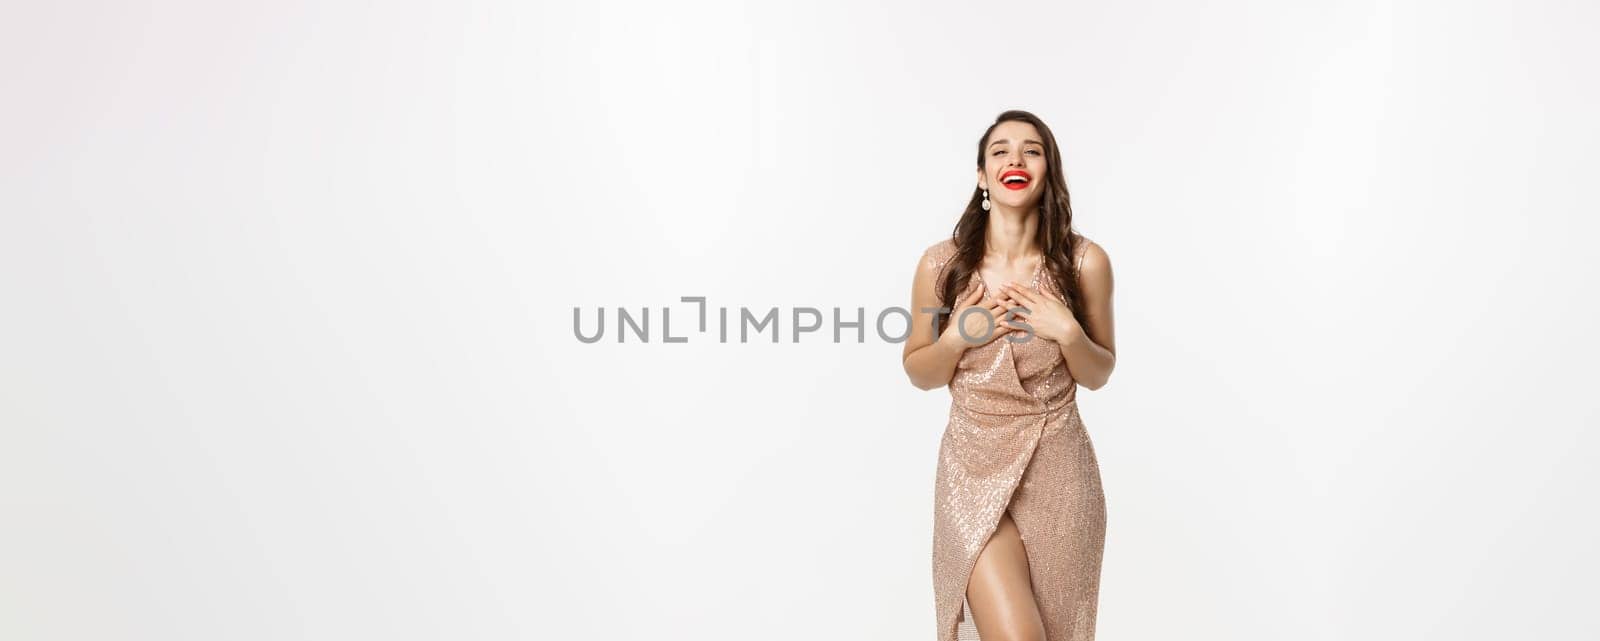 Christmas party and celebration concept. Glamour woman in elegant dress, looking touched and thankful, laughing coquettish, white background.